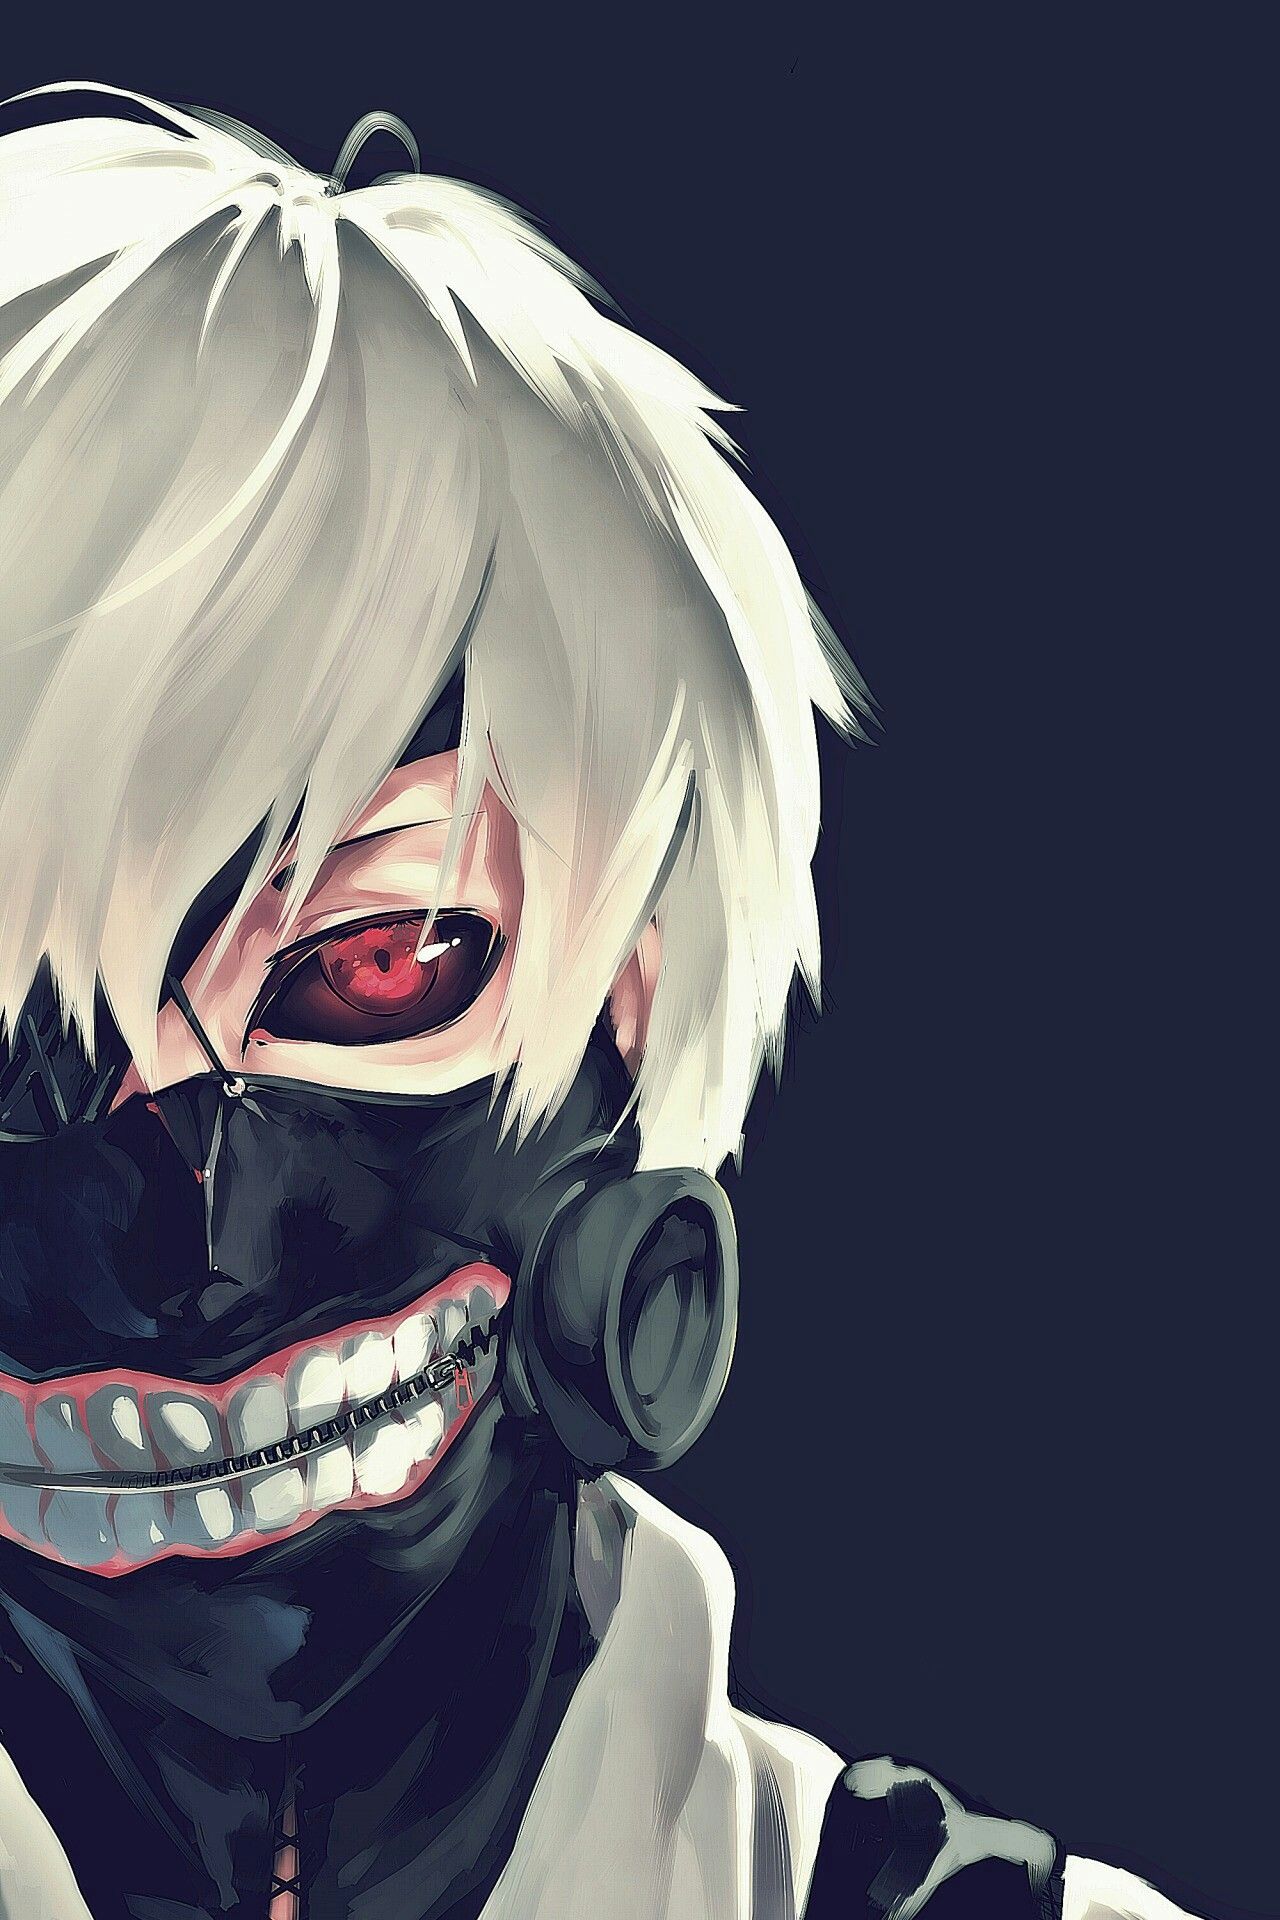 Pin on Anime:Tokyo Ghoul